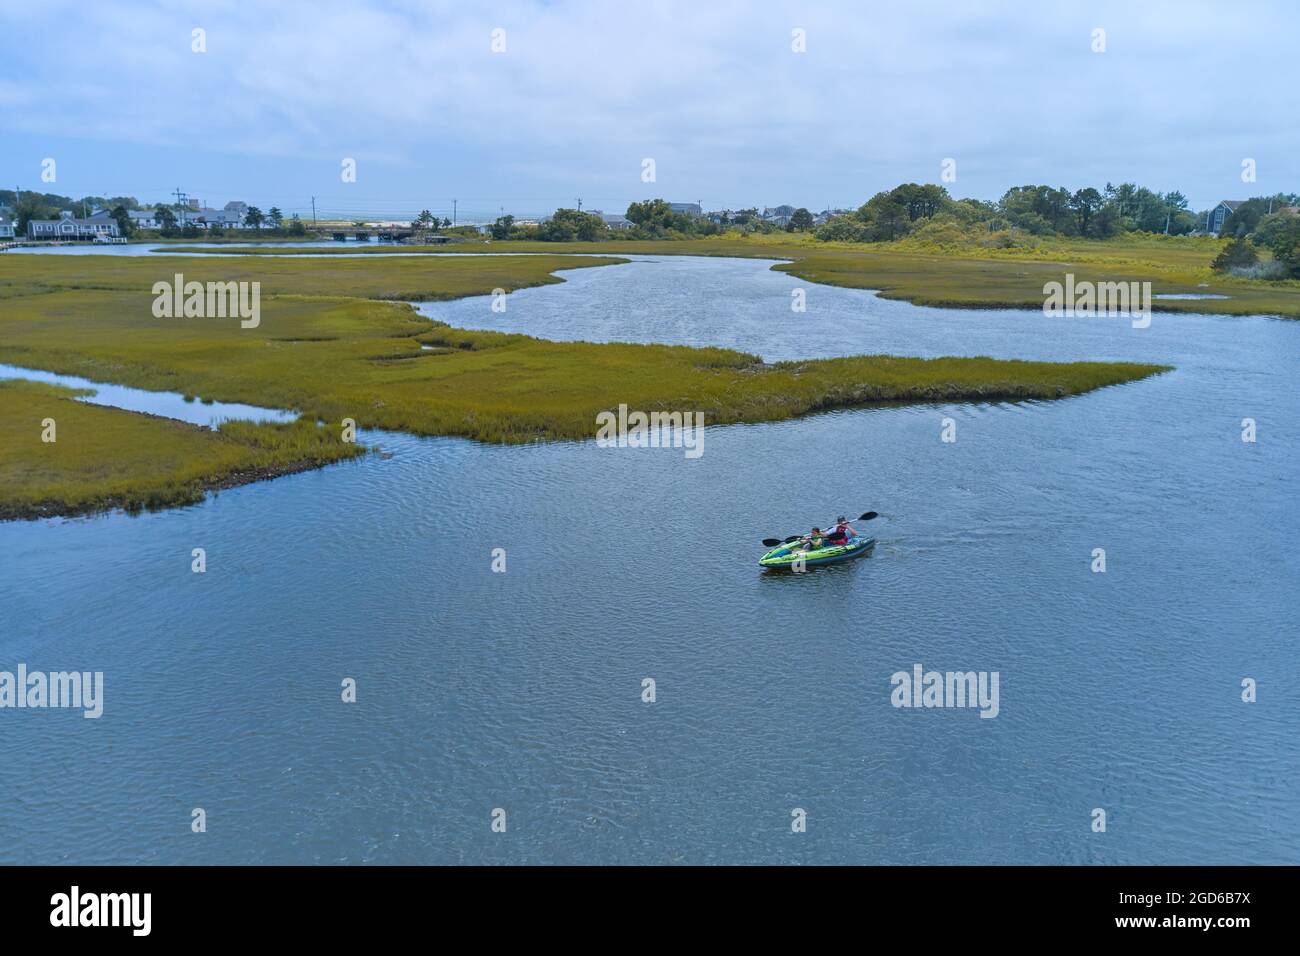 People kayaking in Swan pond river in Dennis port, Cape Cod Stock Photo